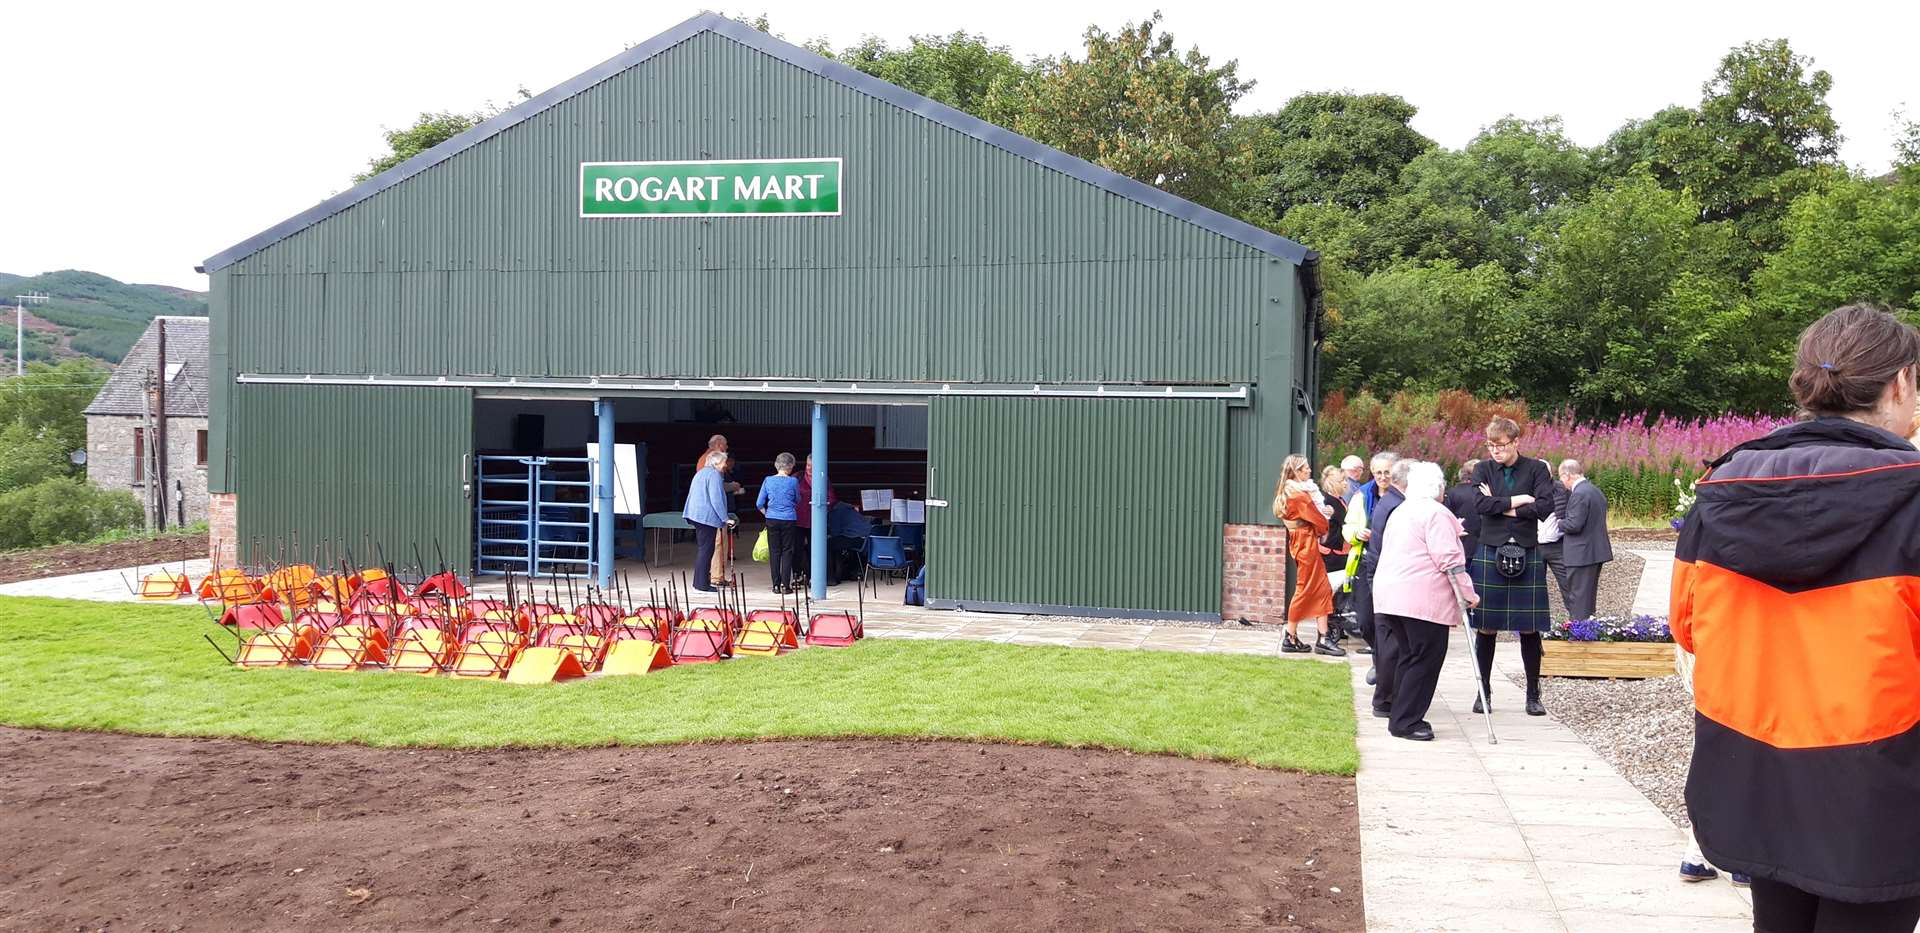 Rogart Mart is the day of the official opening.